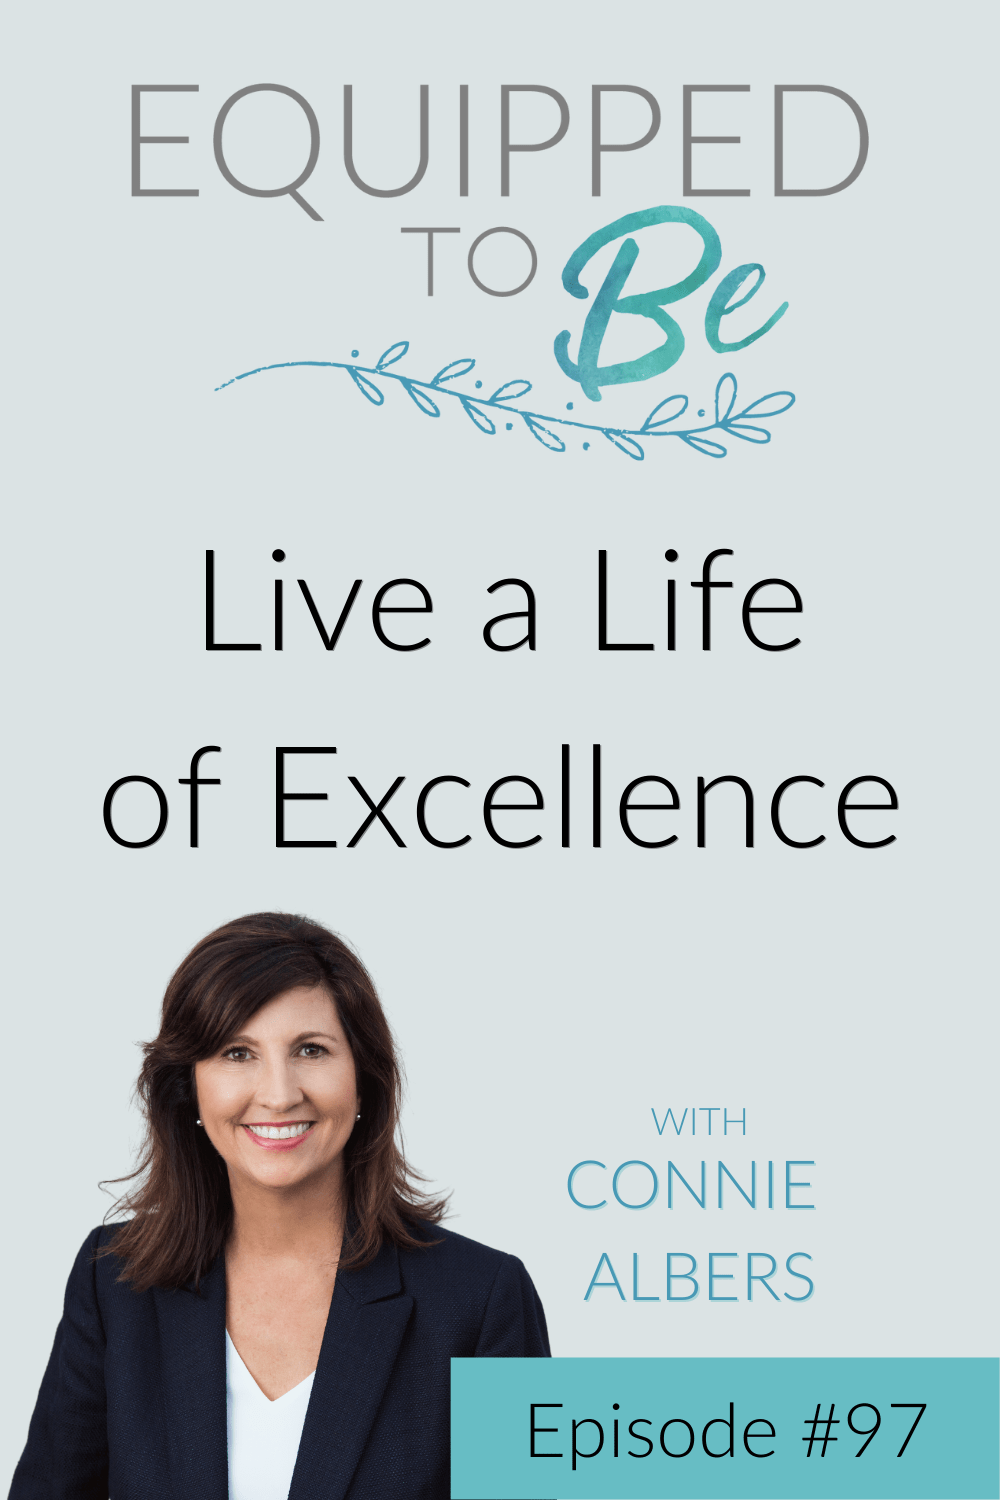 Live a Life of Excellence - ETB #97